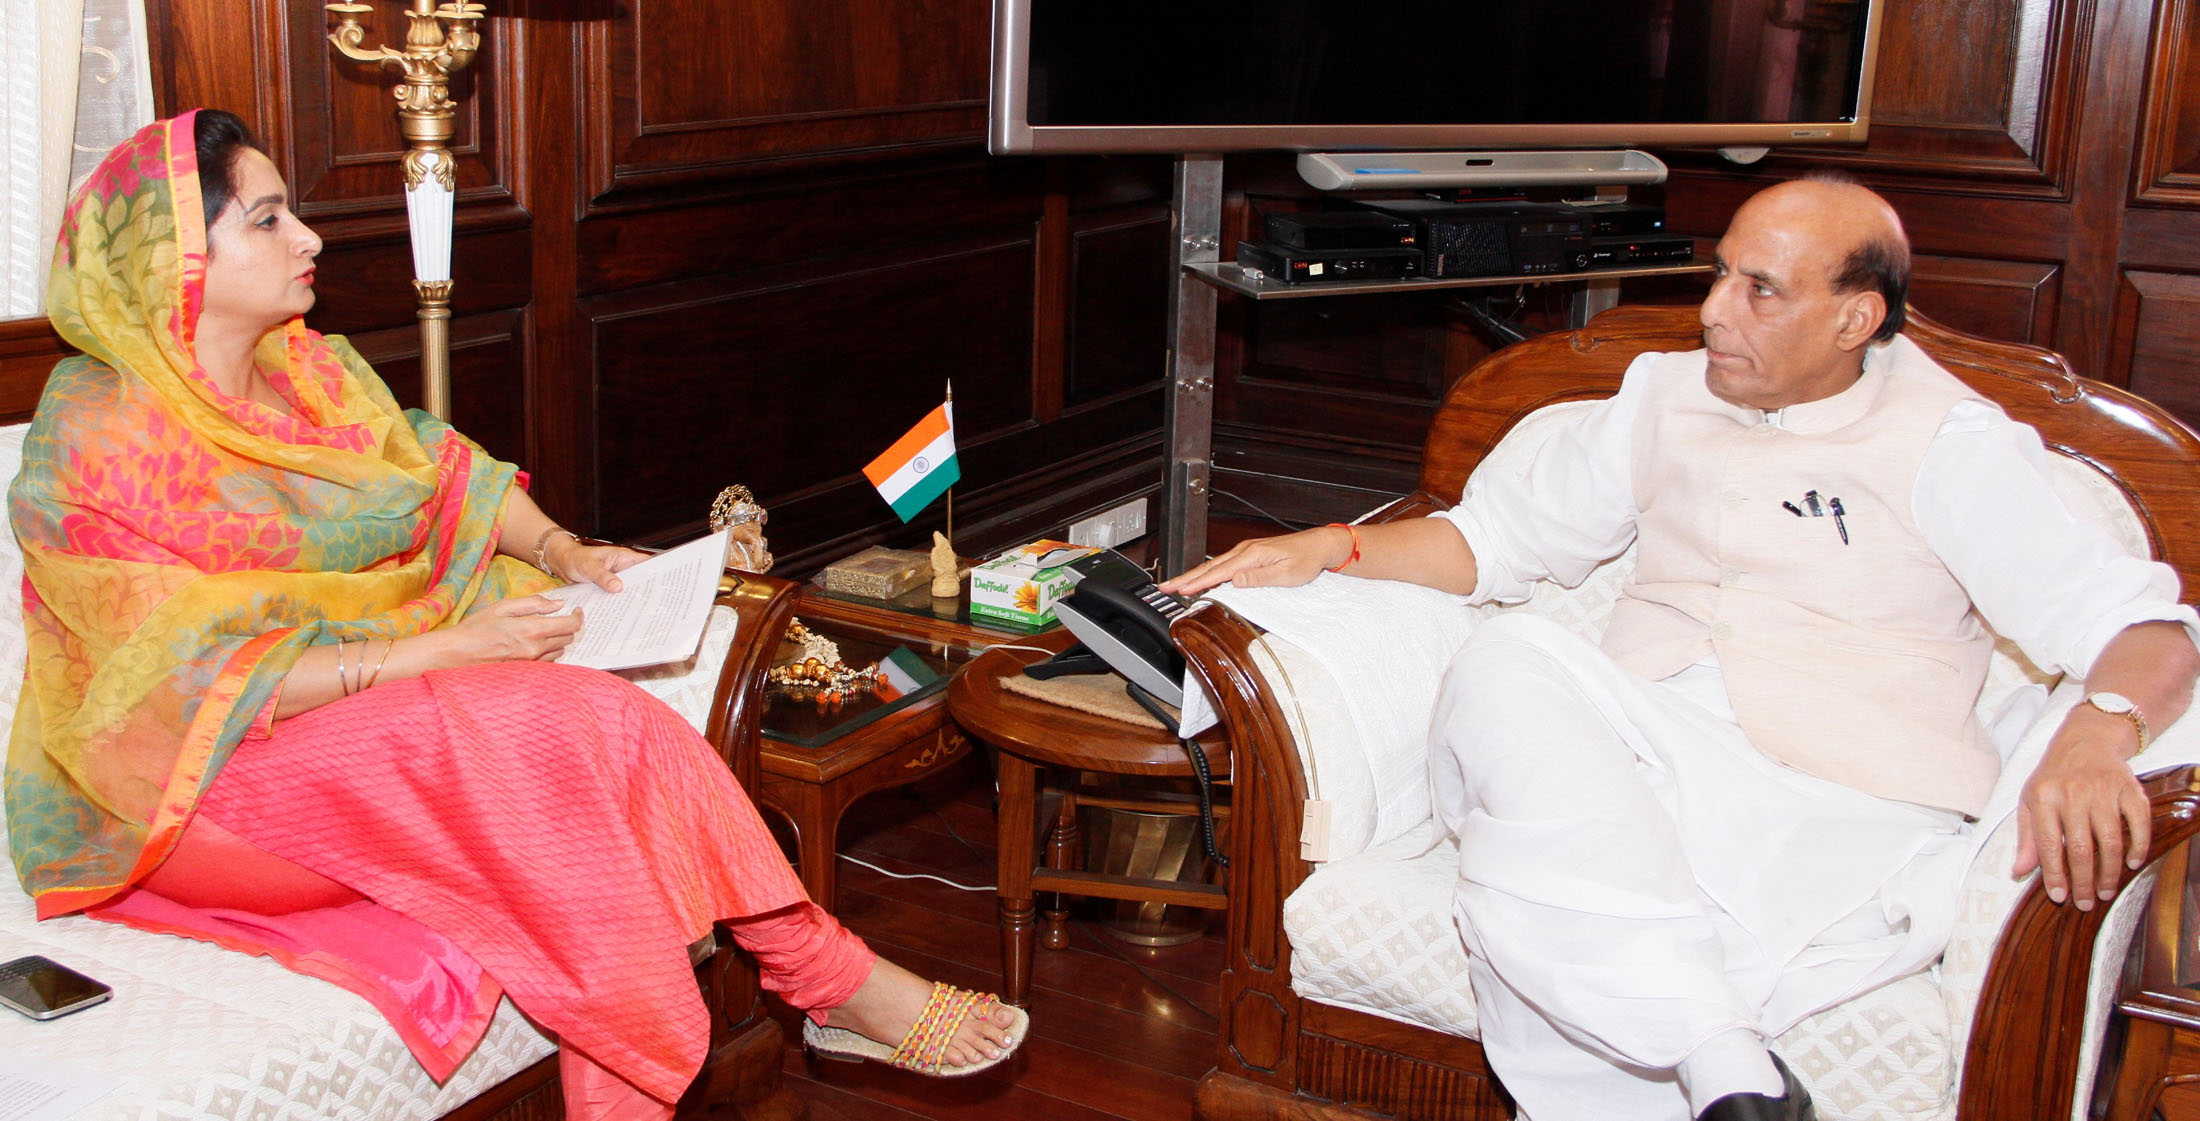 The Union Minister for Food Processing Industries, Smt. Harsimrat Kaur Badal calling on the Union Home Minister, Shri Rajnath Singh, in New Delhi on November 04, 2015.